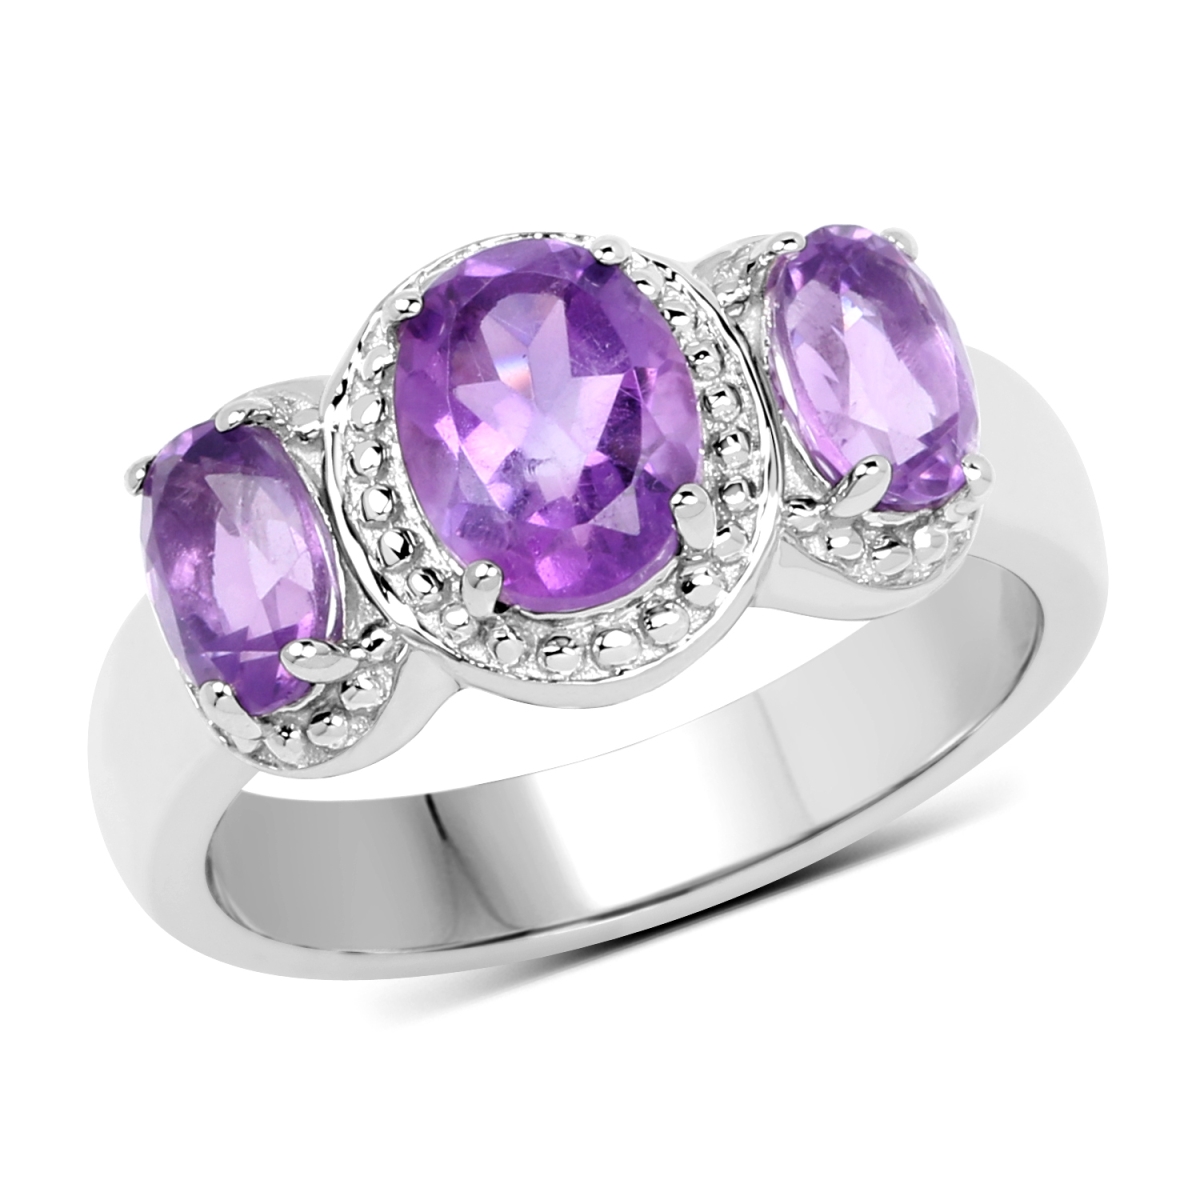 Picture of Malaika QR19201A-SSR-9 2.01 Carat Genuine Amethyst 0.925 Sterling Silver Ring